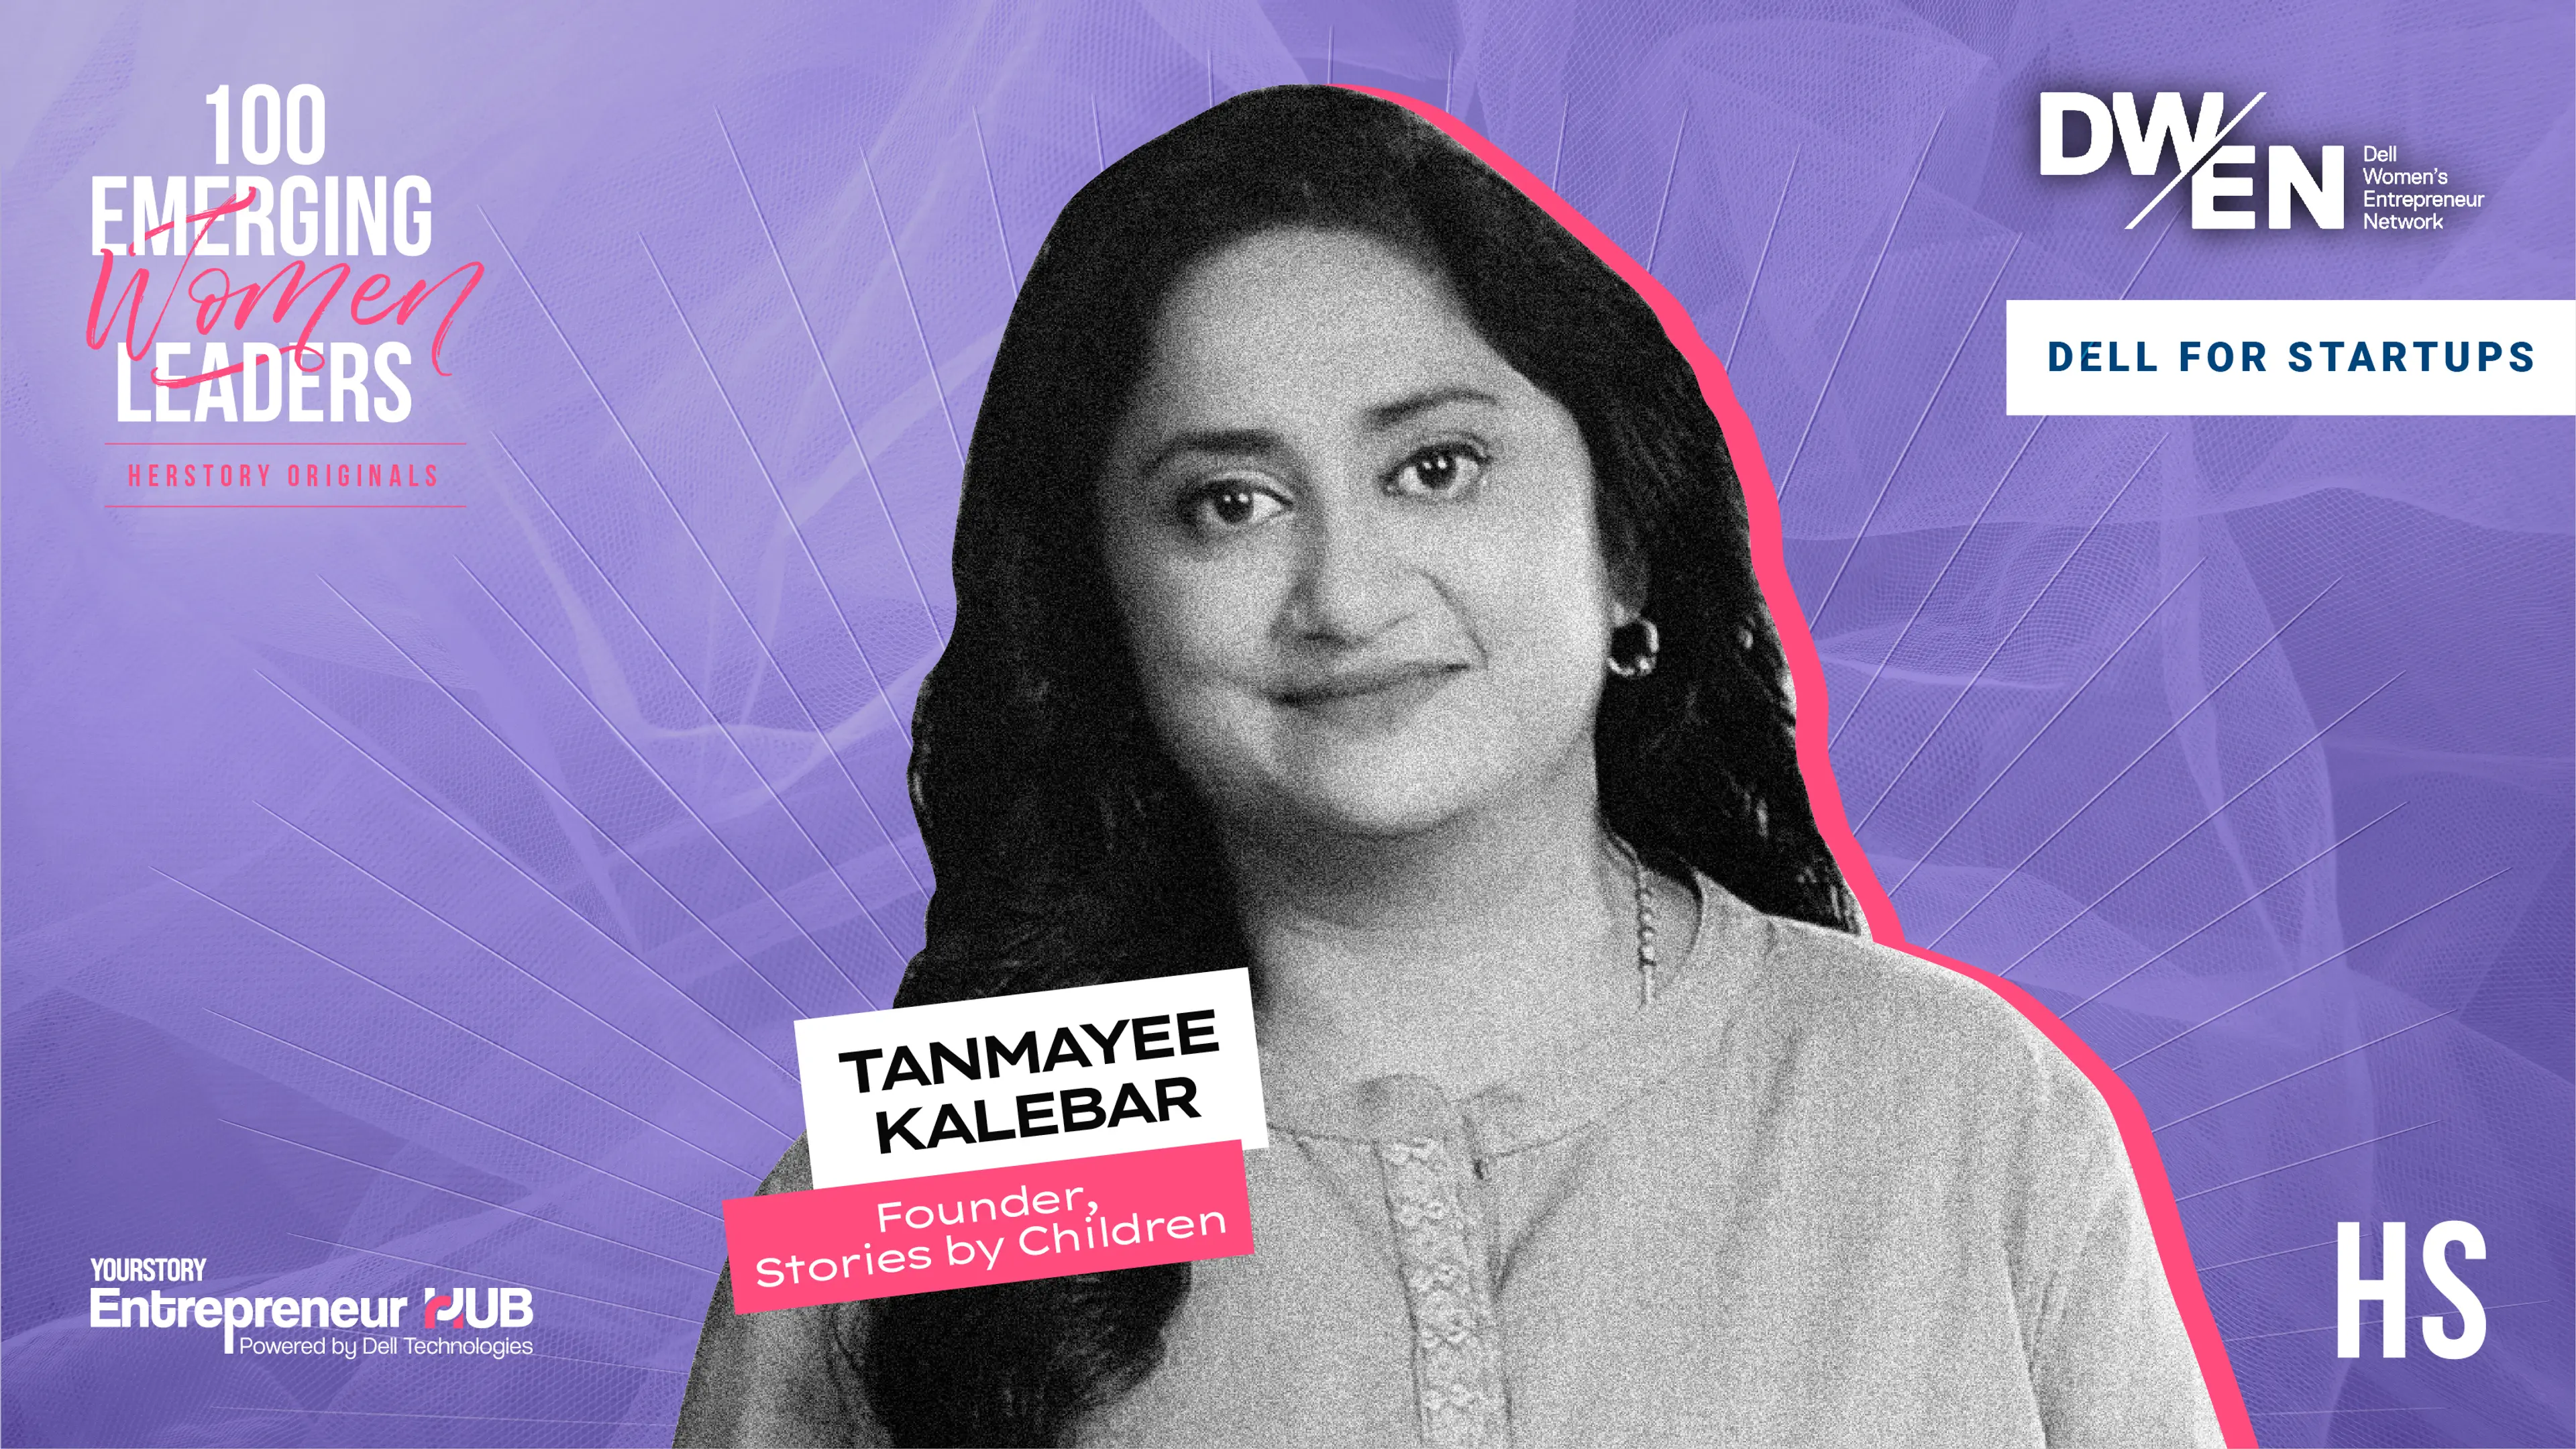 [100 Emerging Women Leaders] How Tanmayee Kalebar is helping children become authors